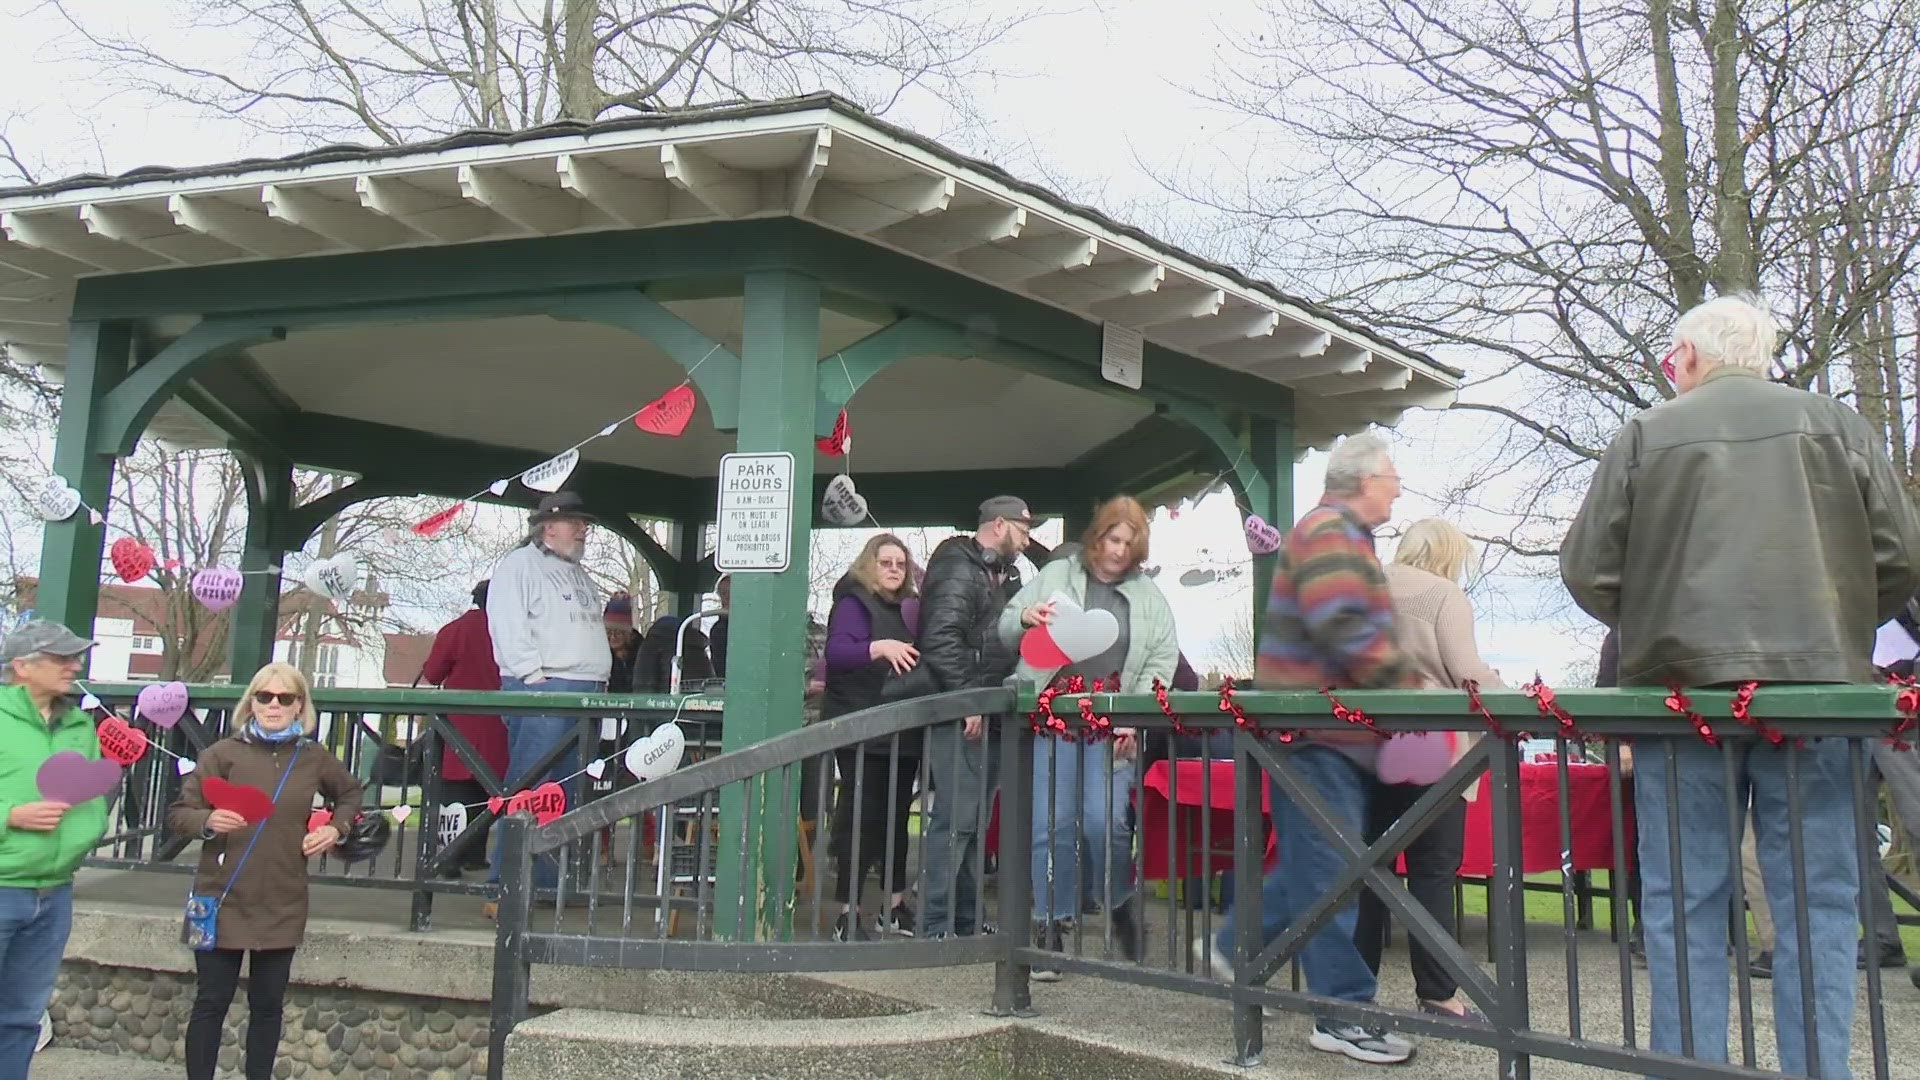 A nonprofit focused on preserving the city's history hosted an event on Saturday for the public to share their love for the century-old gazebo.